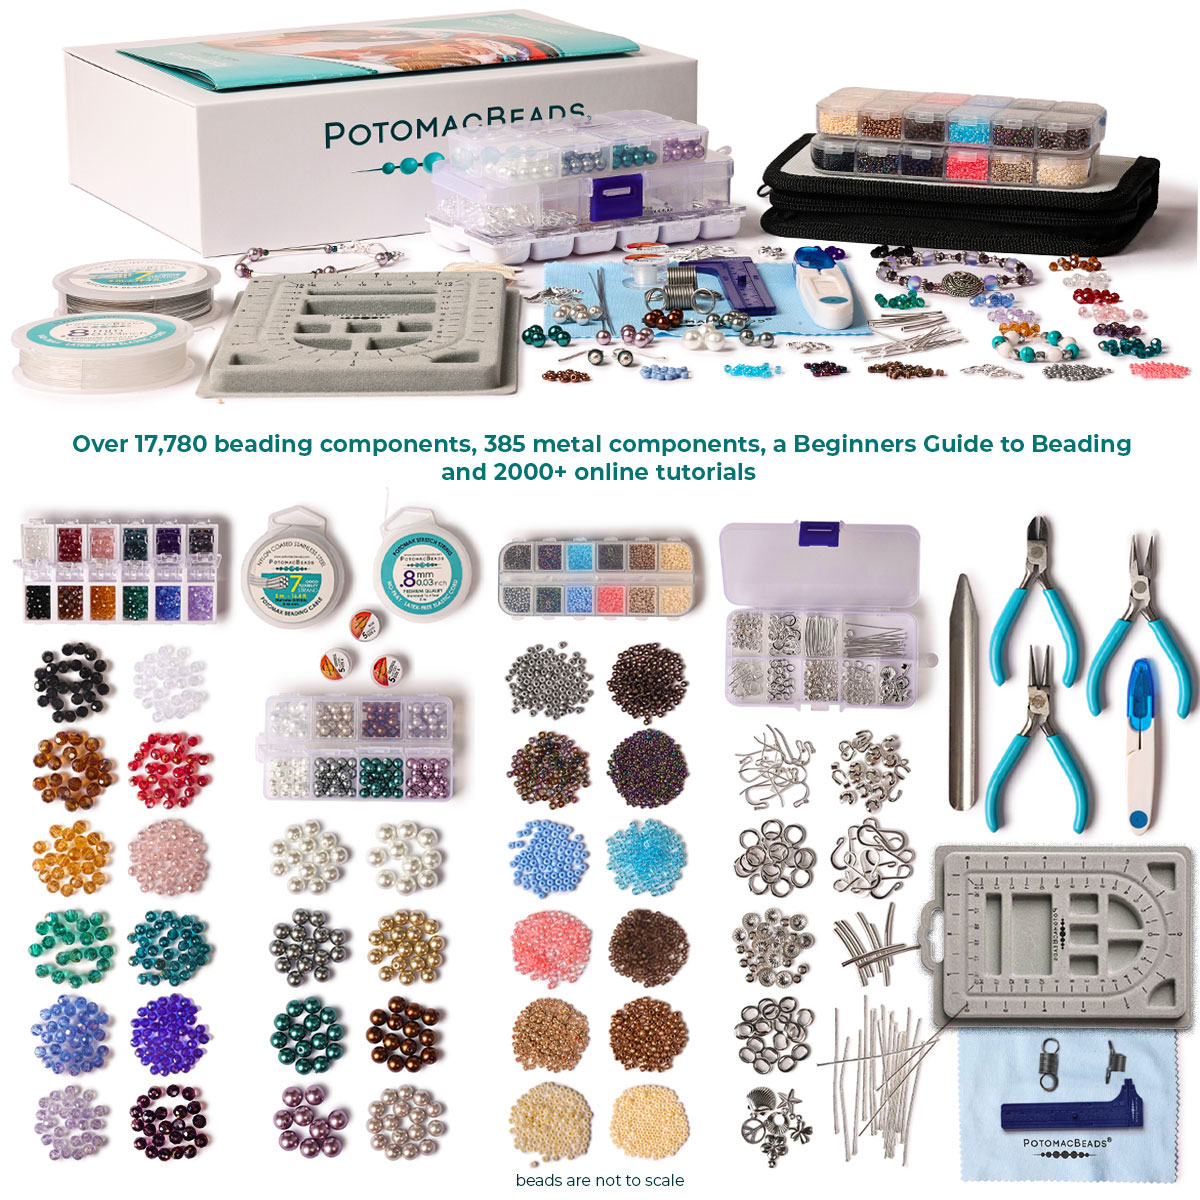 Beading supplies: Your complete guide - My World of Beads